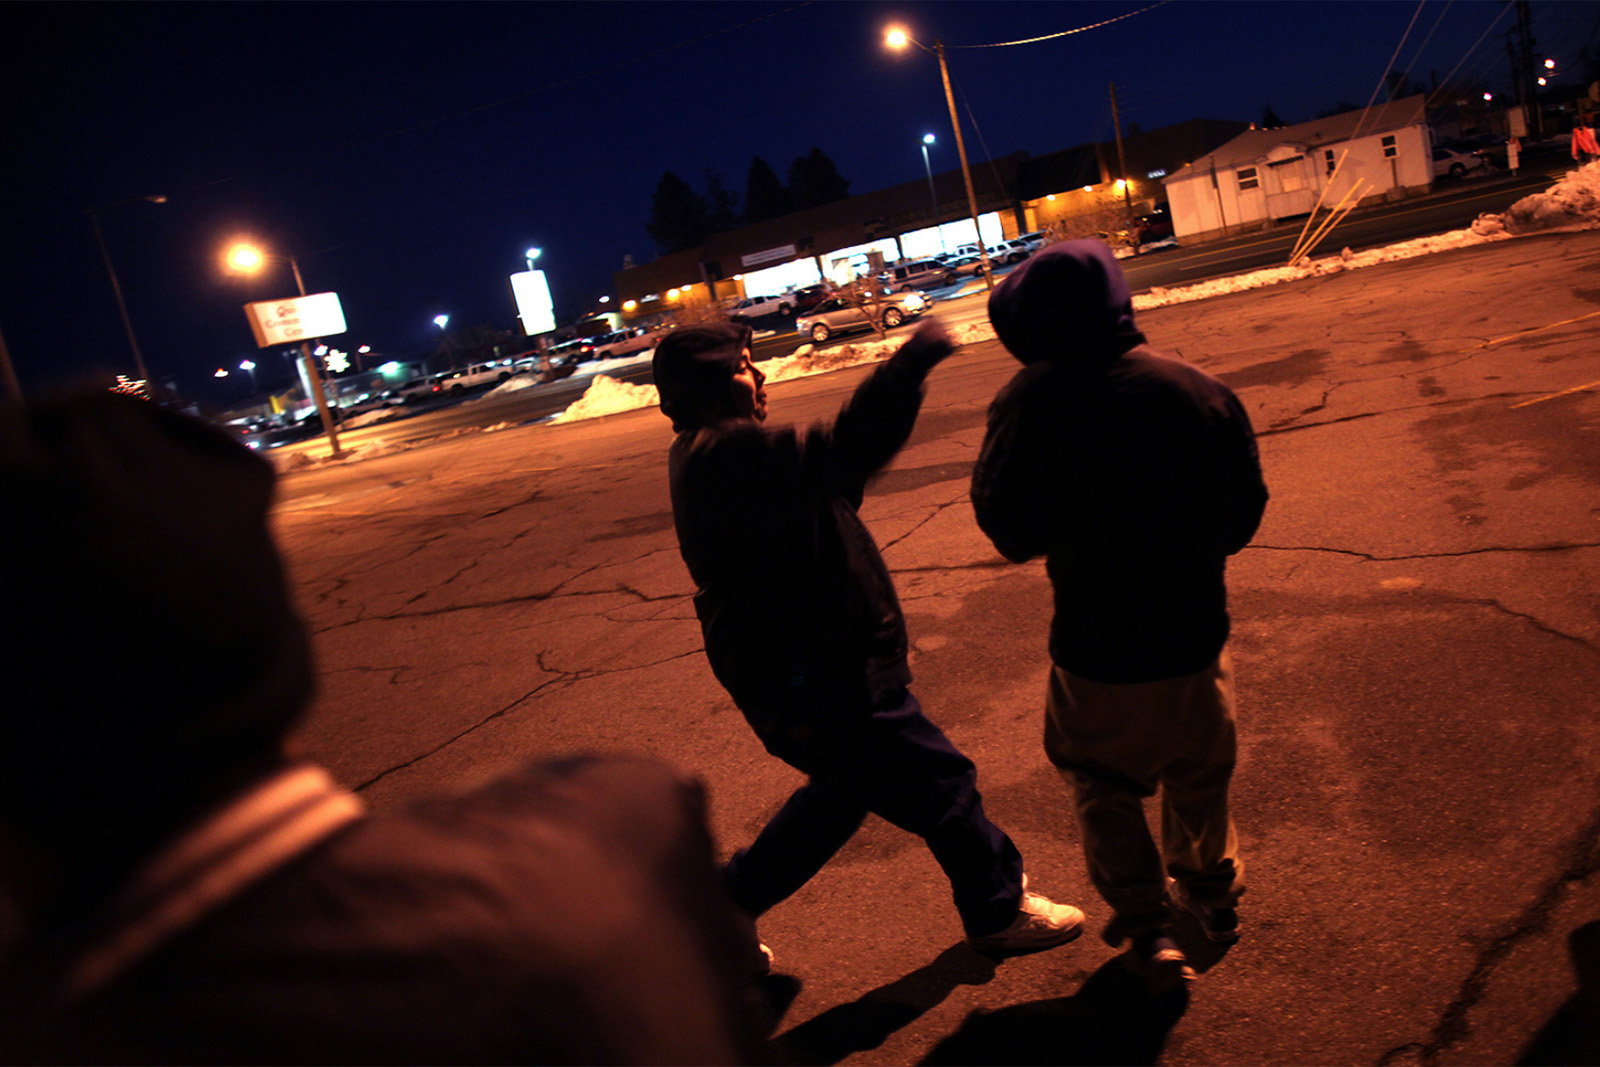 Rural gangs in Washington state by Seattle photojournalist Mike Kane editorial photographer